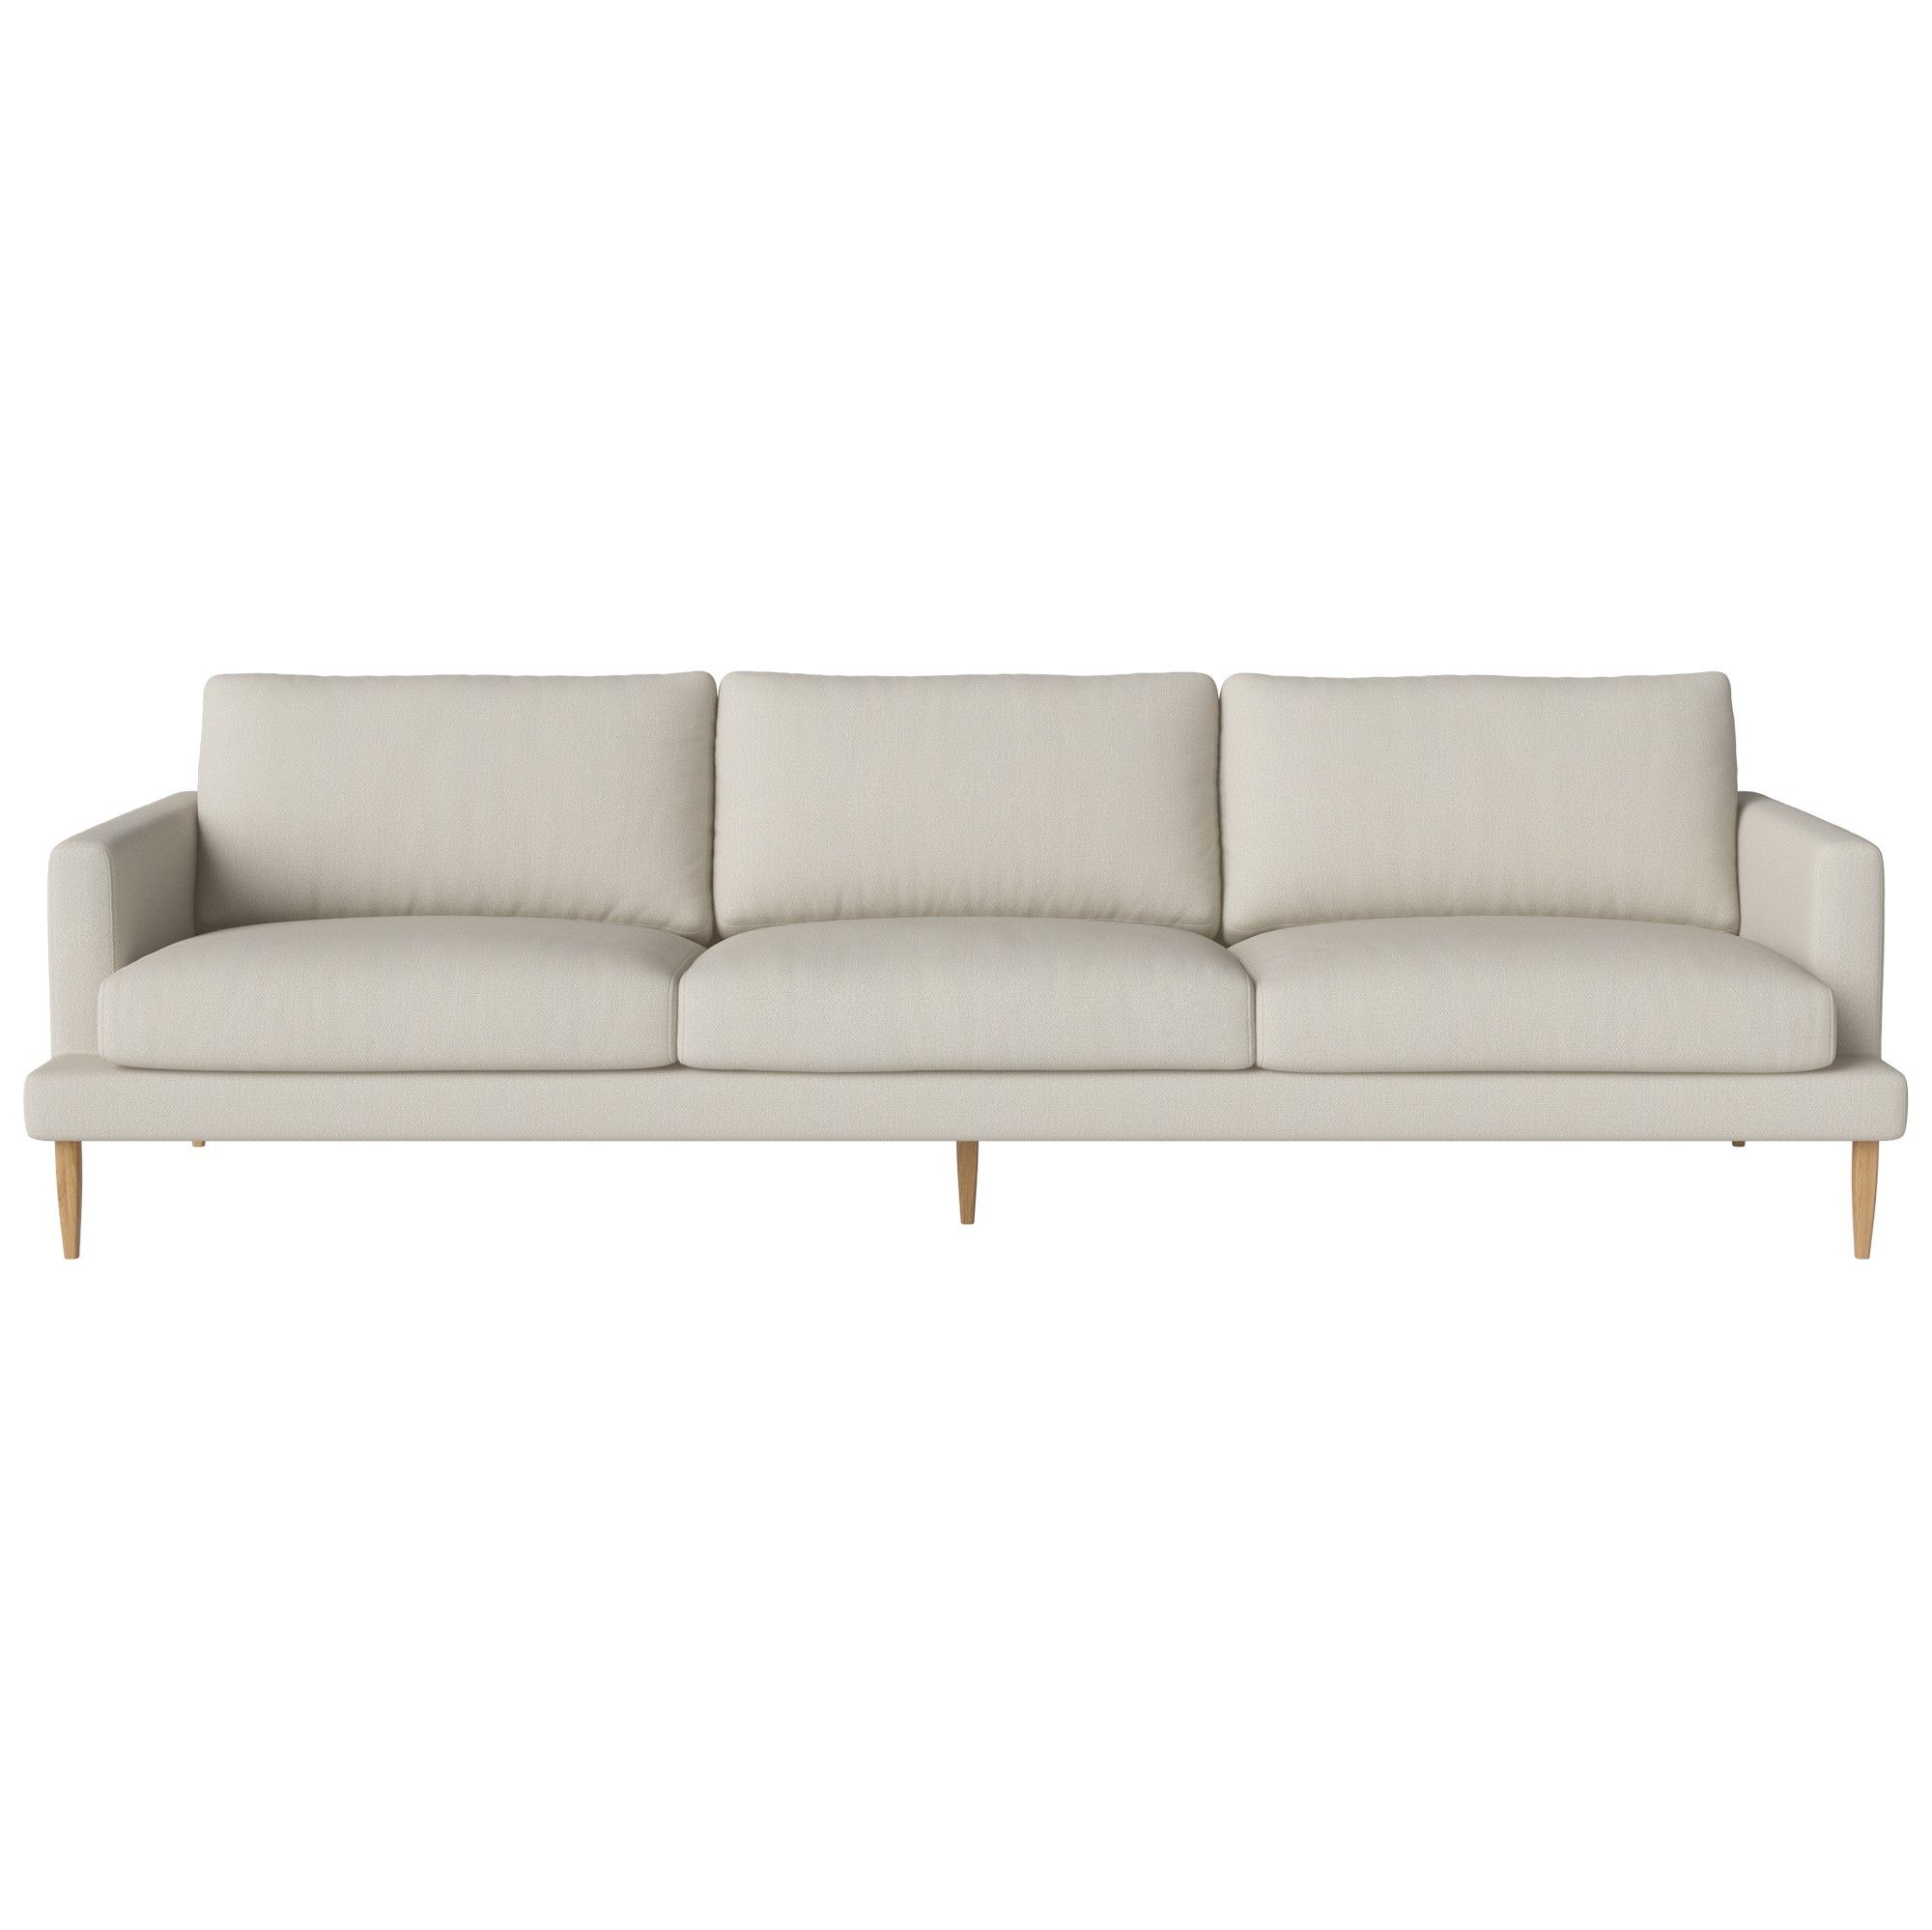 Sofa Veneda 4 Places – Bolia With Traditional 3 Seater Sofas (View 11 of 15)